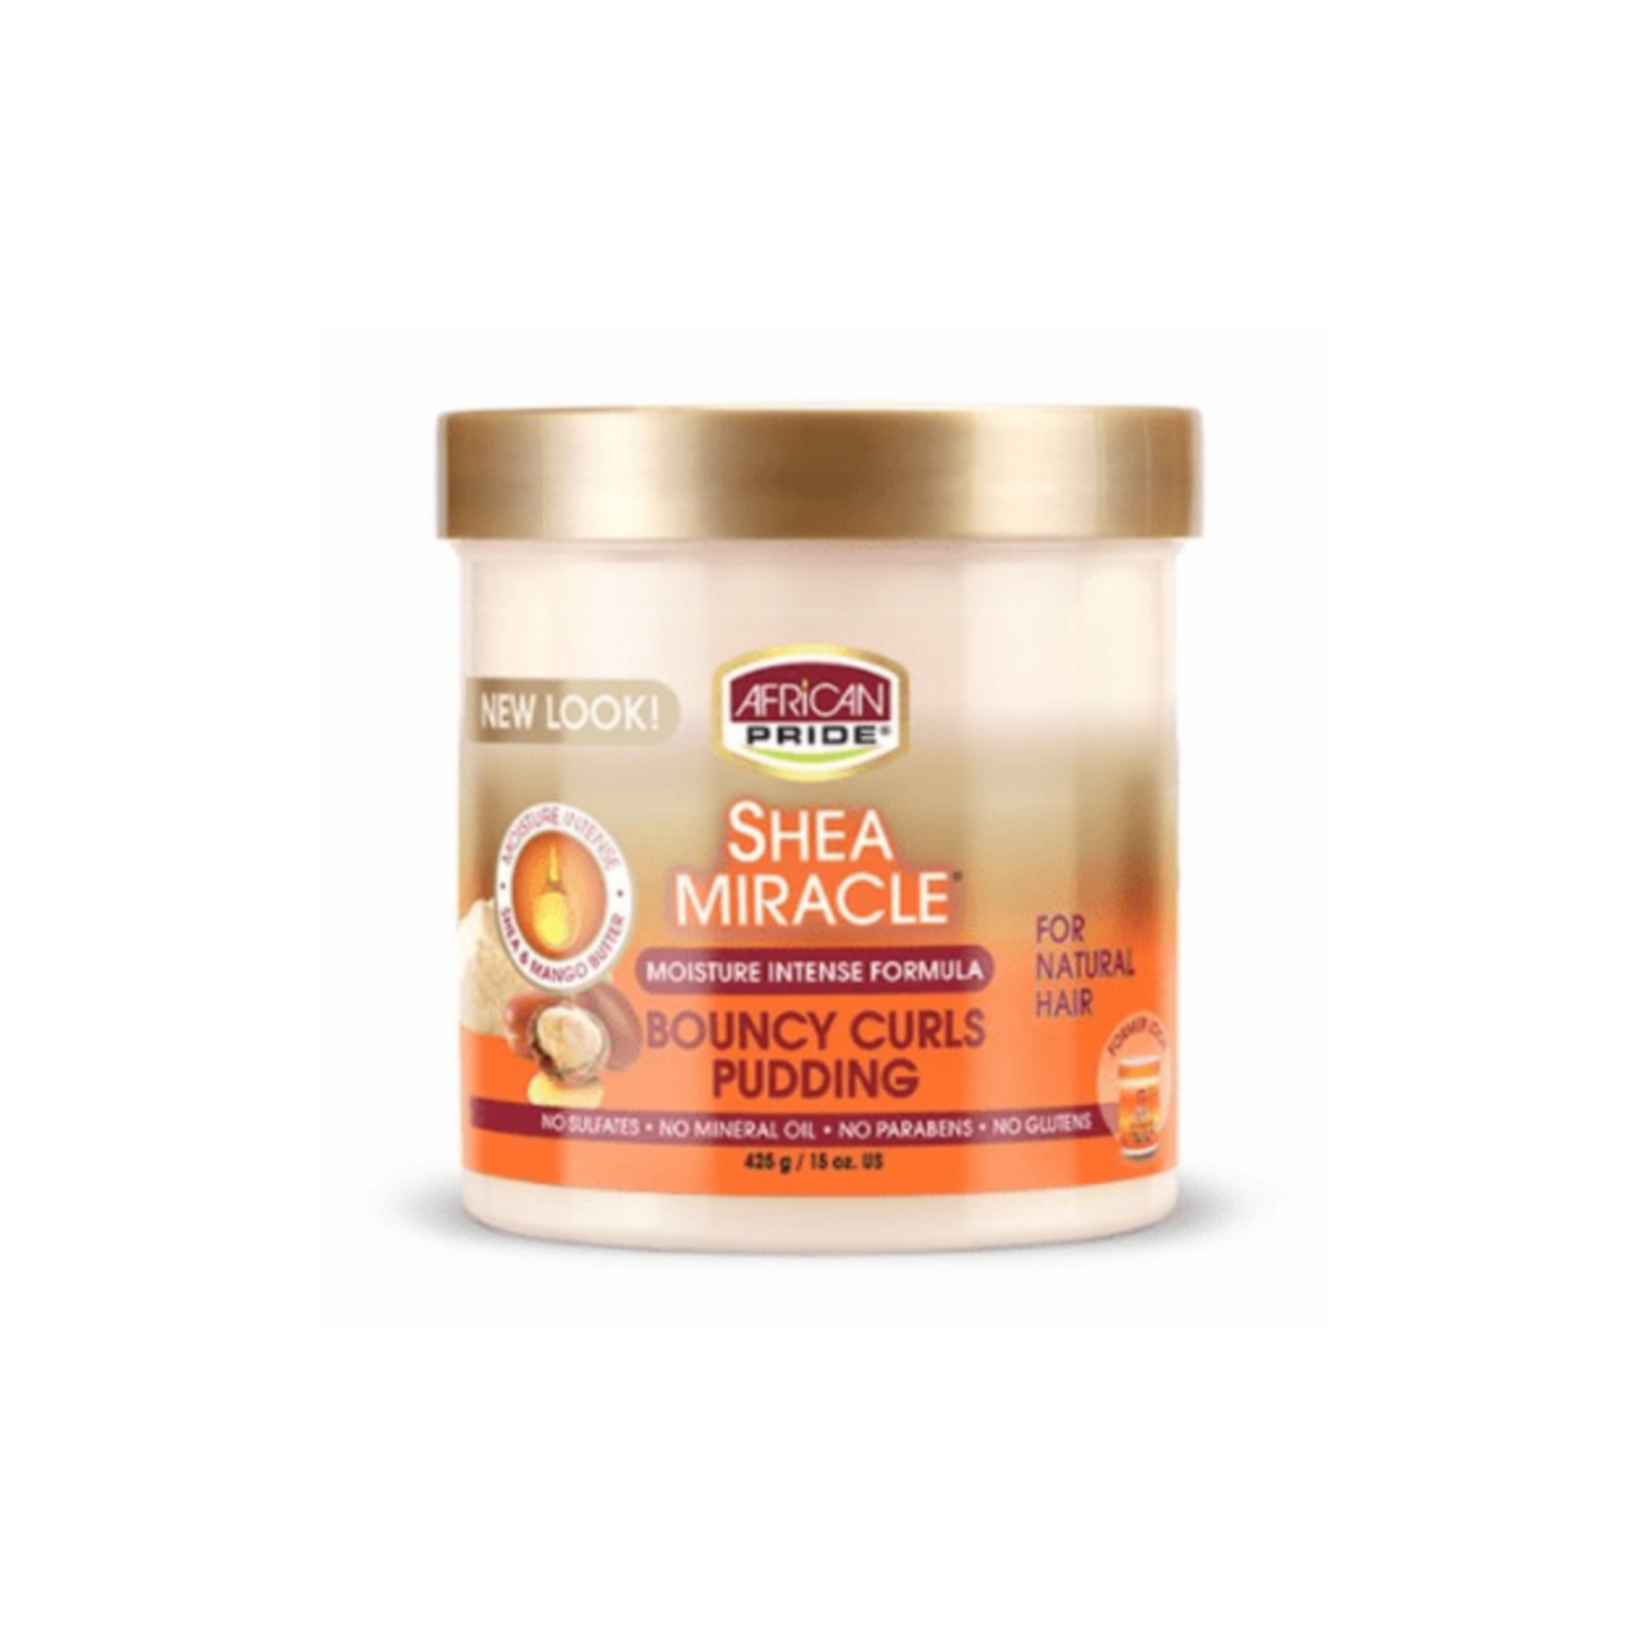 African Pride African Pride Shea Miracle bouncy curls pudding